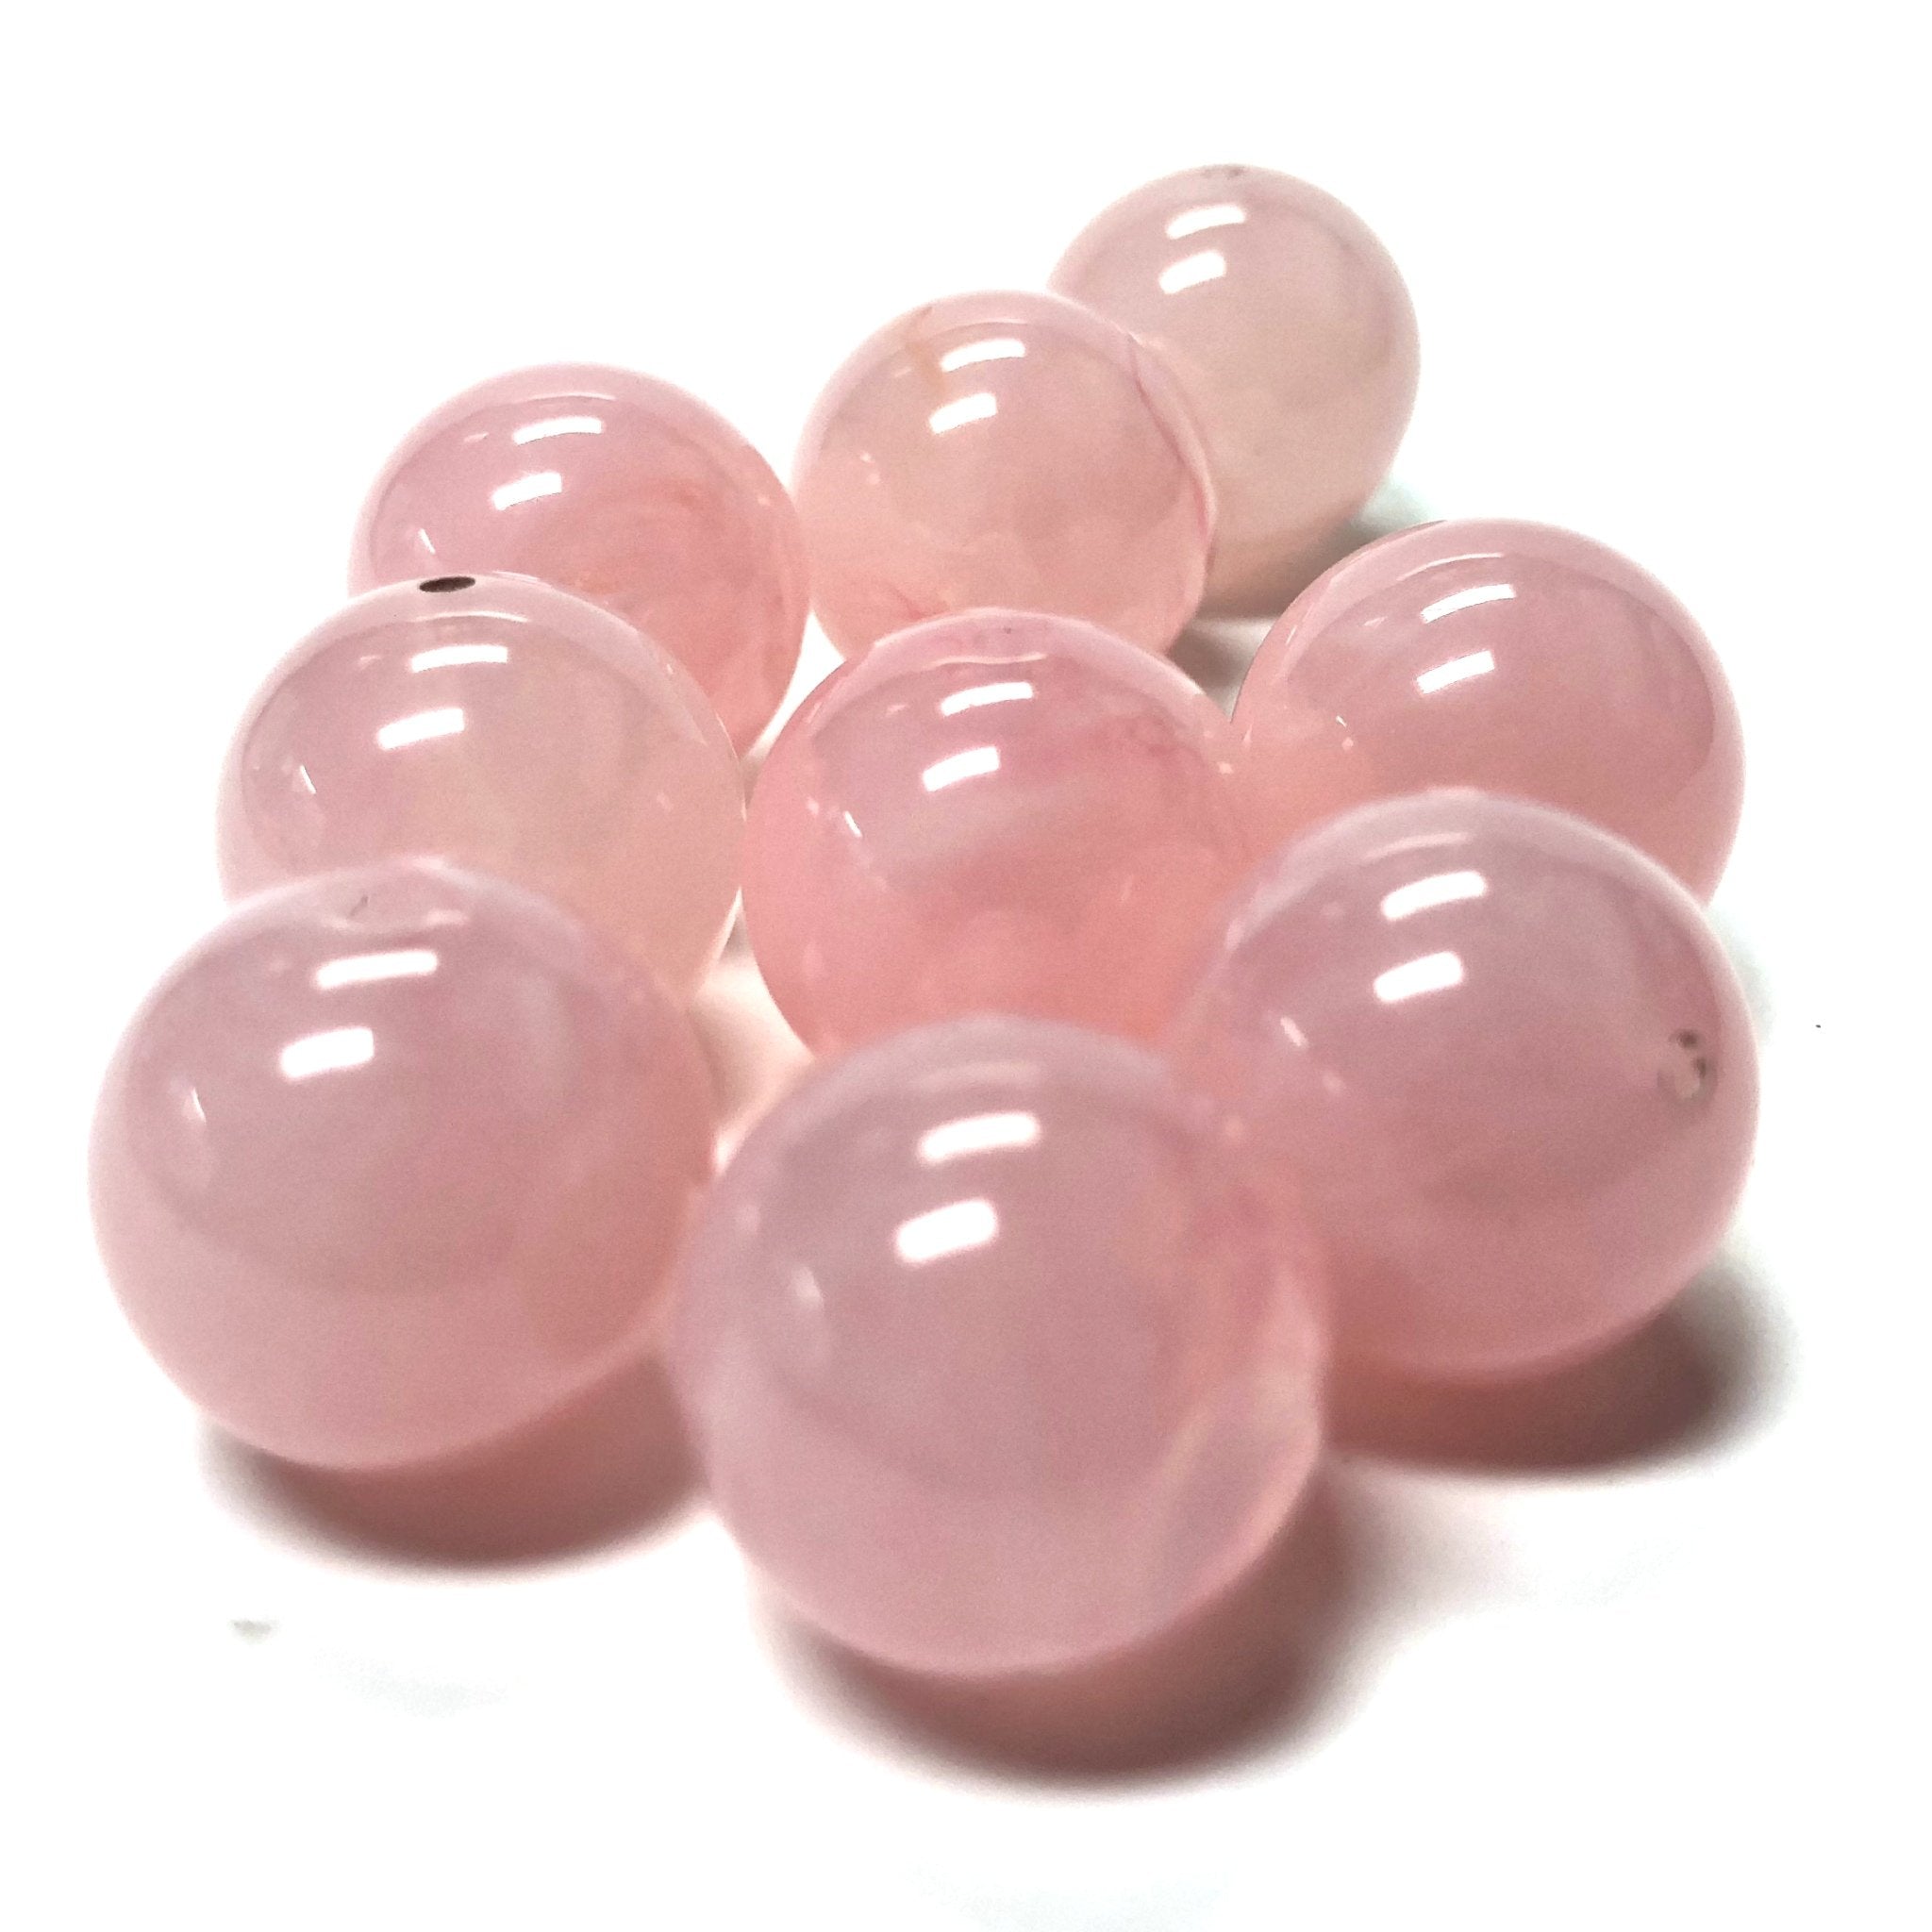 10MM Pink Agate Acrylic Beads (144 pieces)